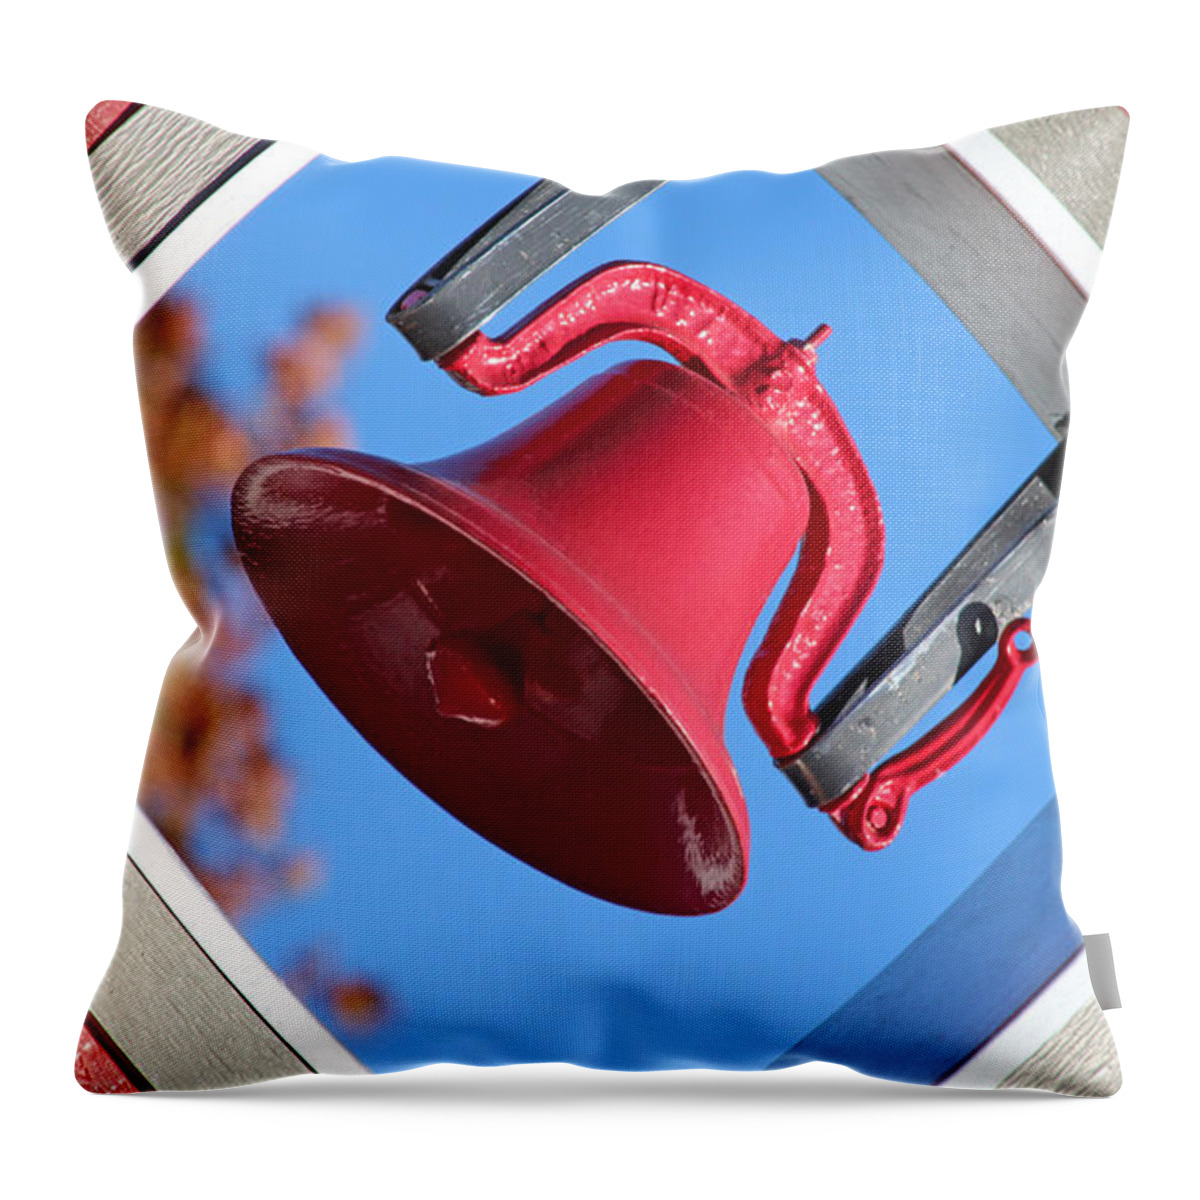 Wylie Throw Pillow featuring the photograph Small Town Firehouse Bell by DiDesigns Graphics